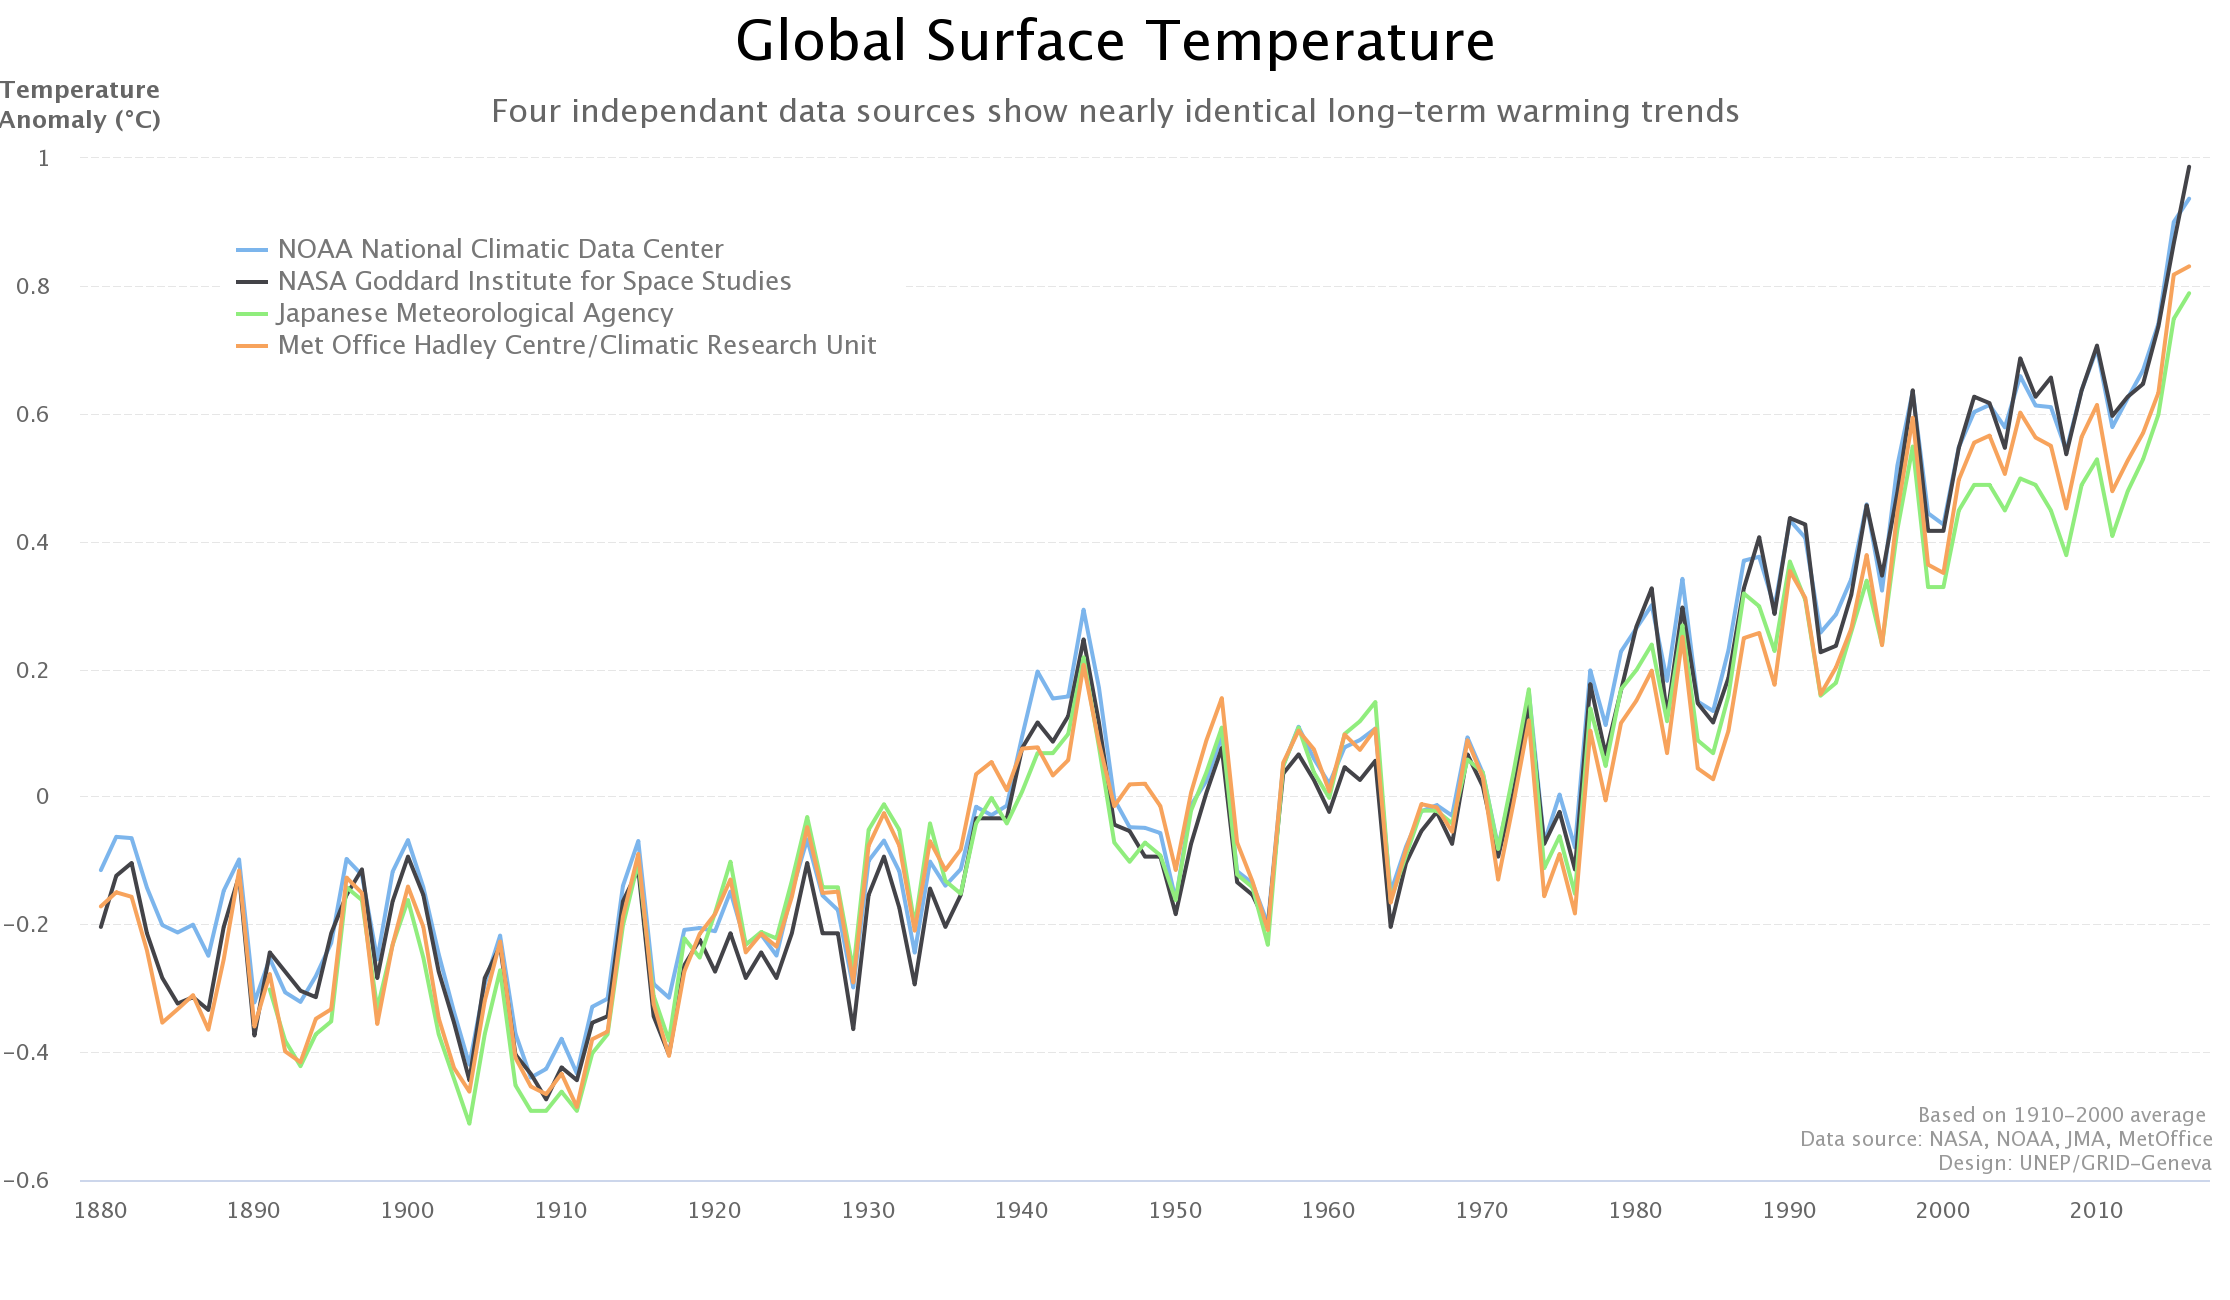 A line graph showing data for global surface temperature